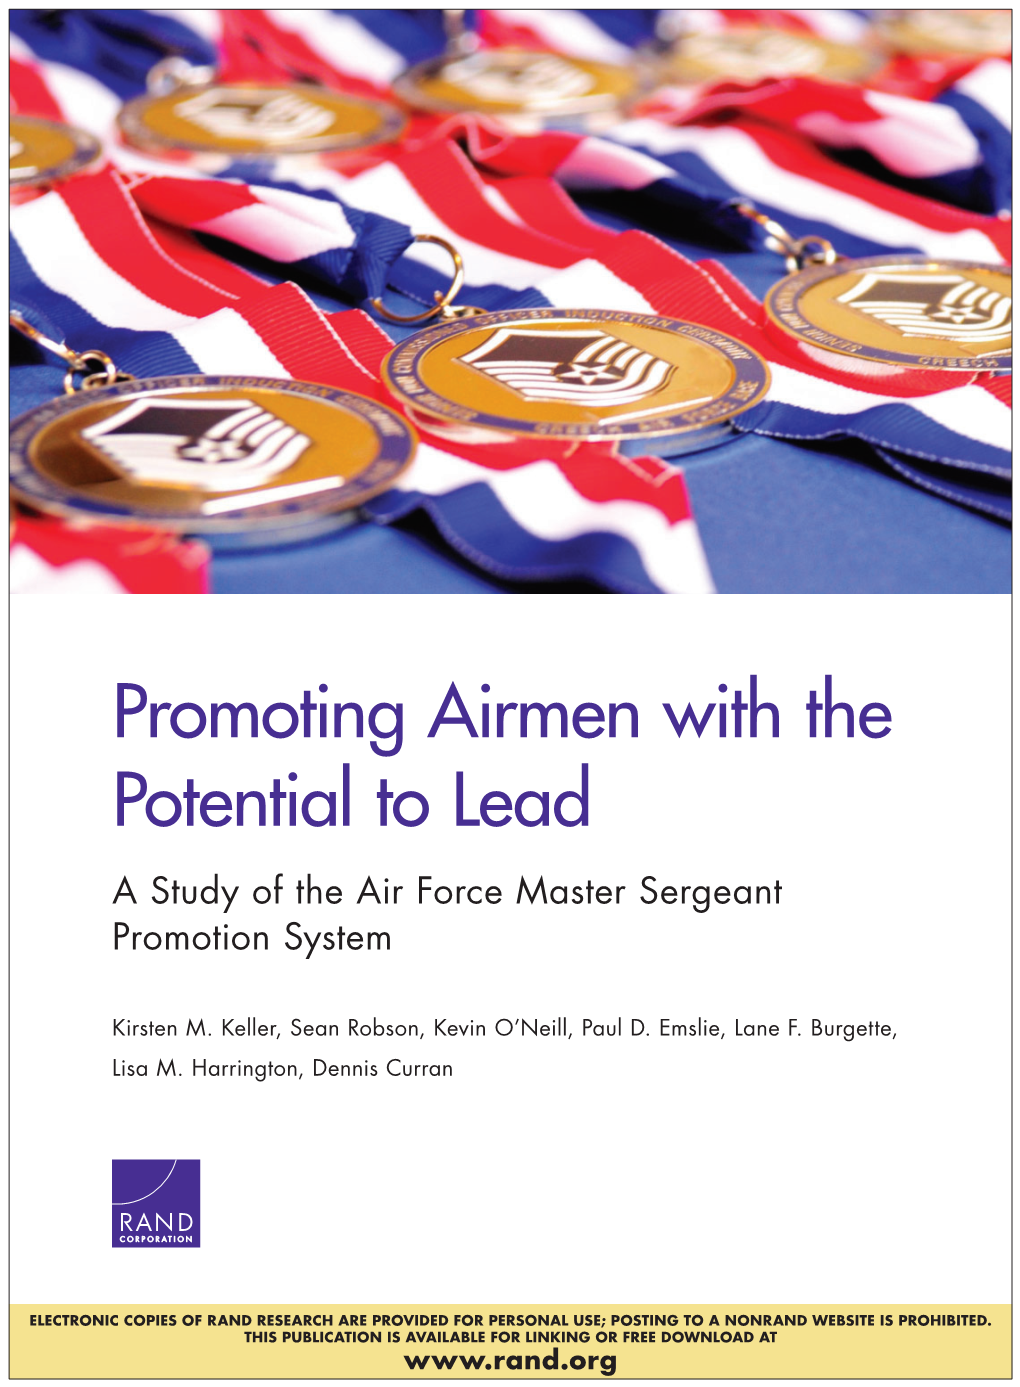 Promoting Airmen with the Potential to Lead: a Study of the Air Force